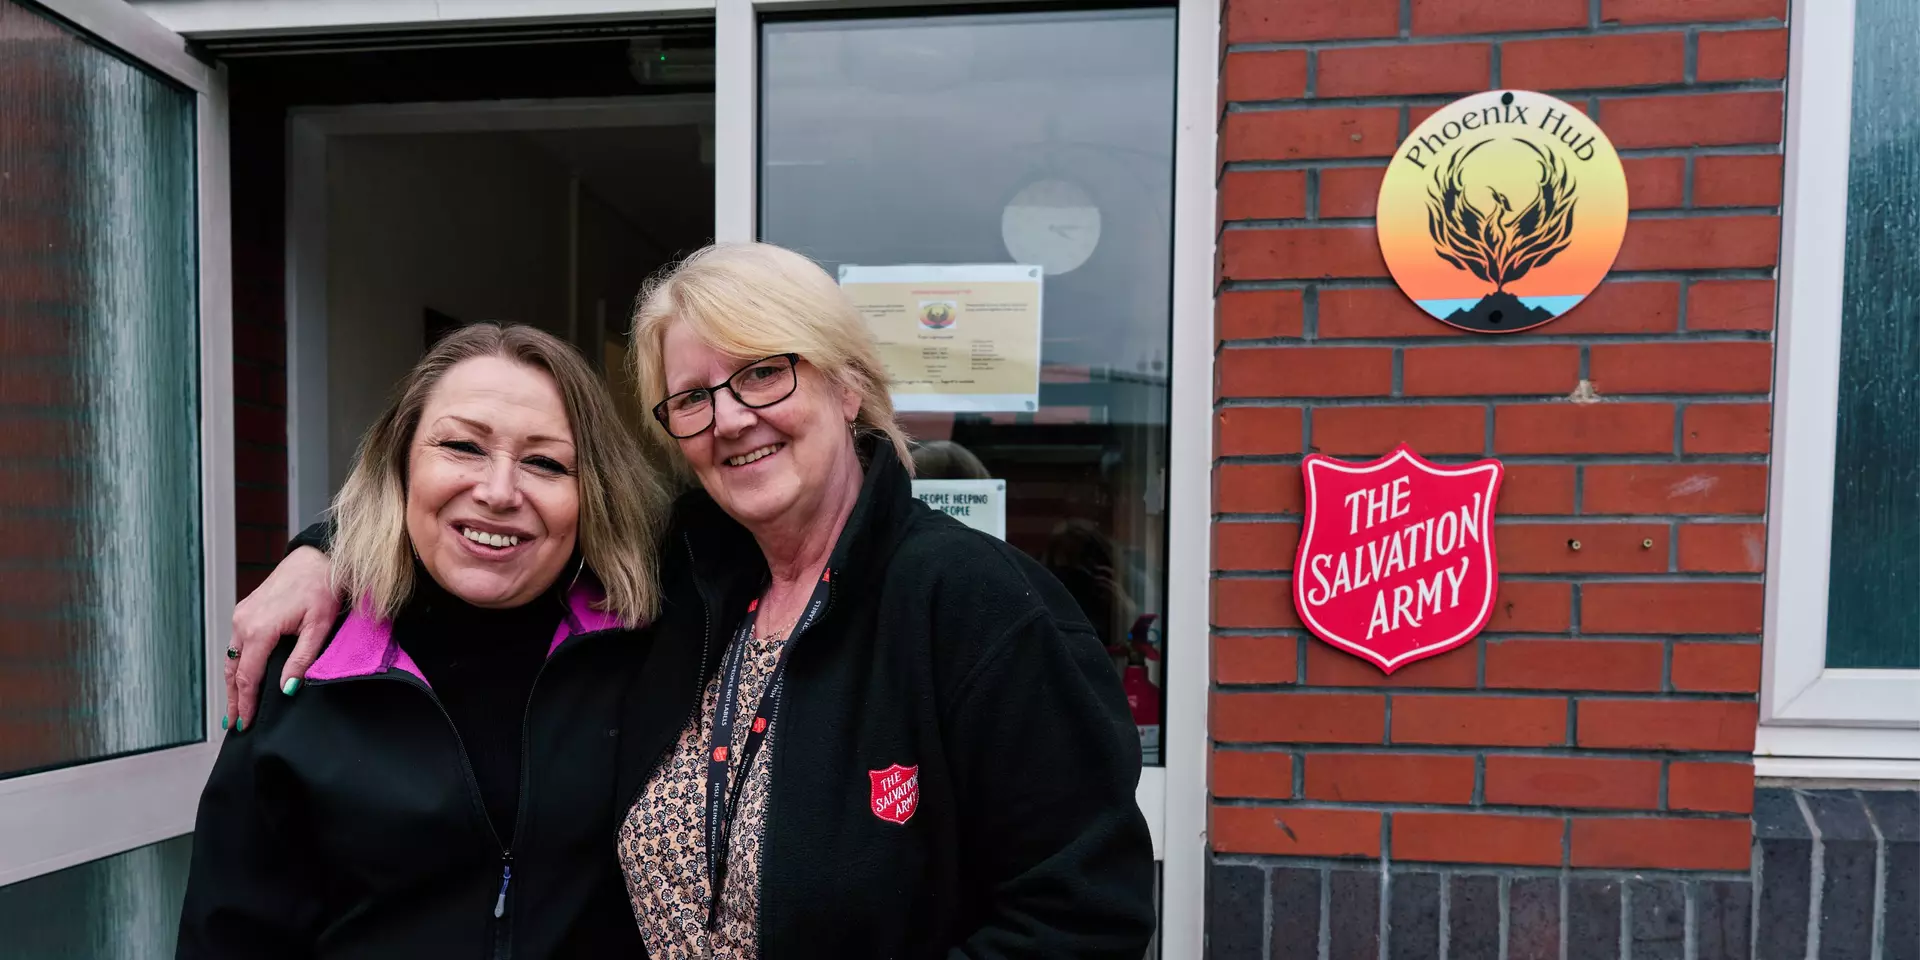 Victoria has a blonde bob and a big smile, she is standing outside her local Salvation Army with her former support worker, an older woman with short fair hair, she has her arm around Victoria's shoulder. They are both looking at the camera and smiling. 